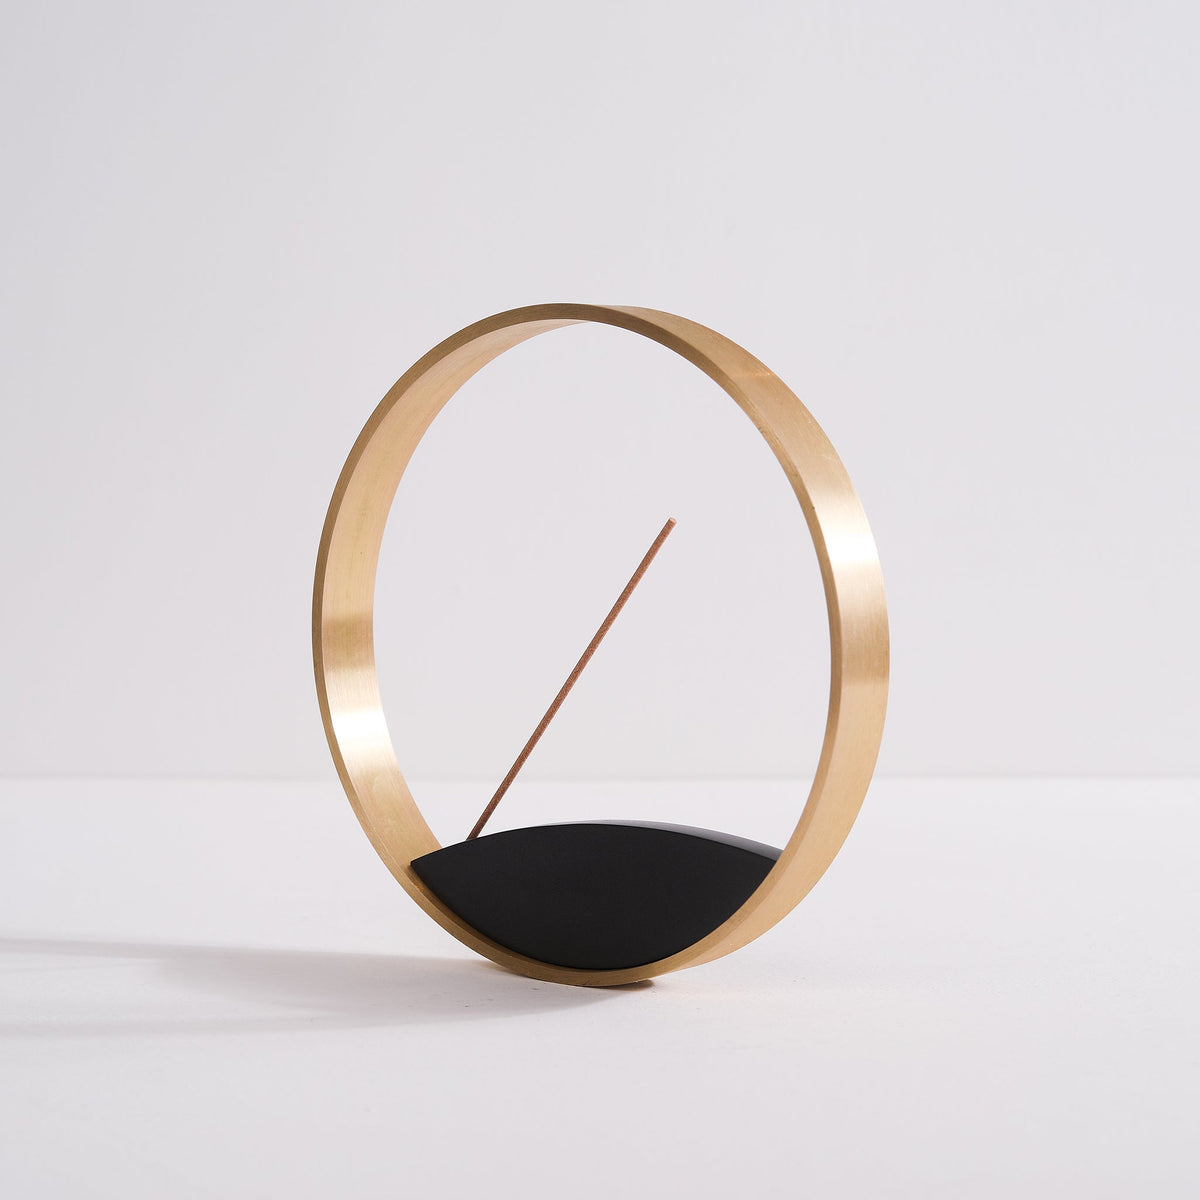 Angled view of modern circular incense holder made from bronze